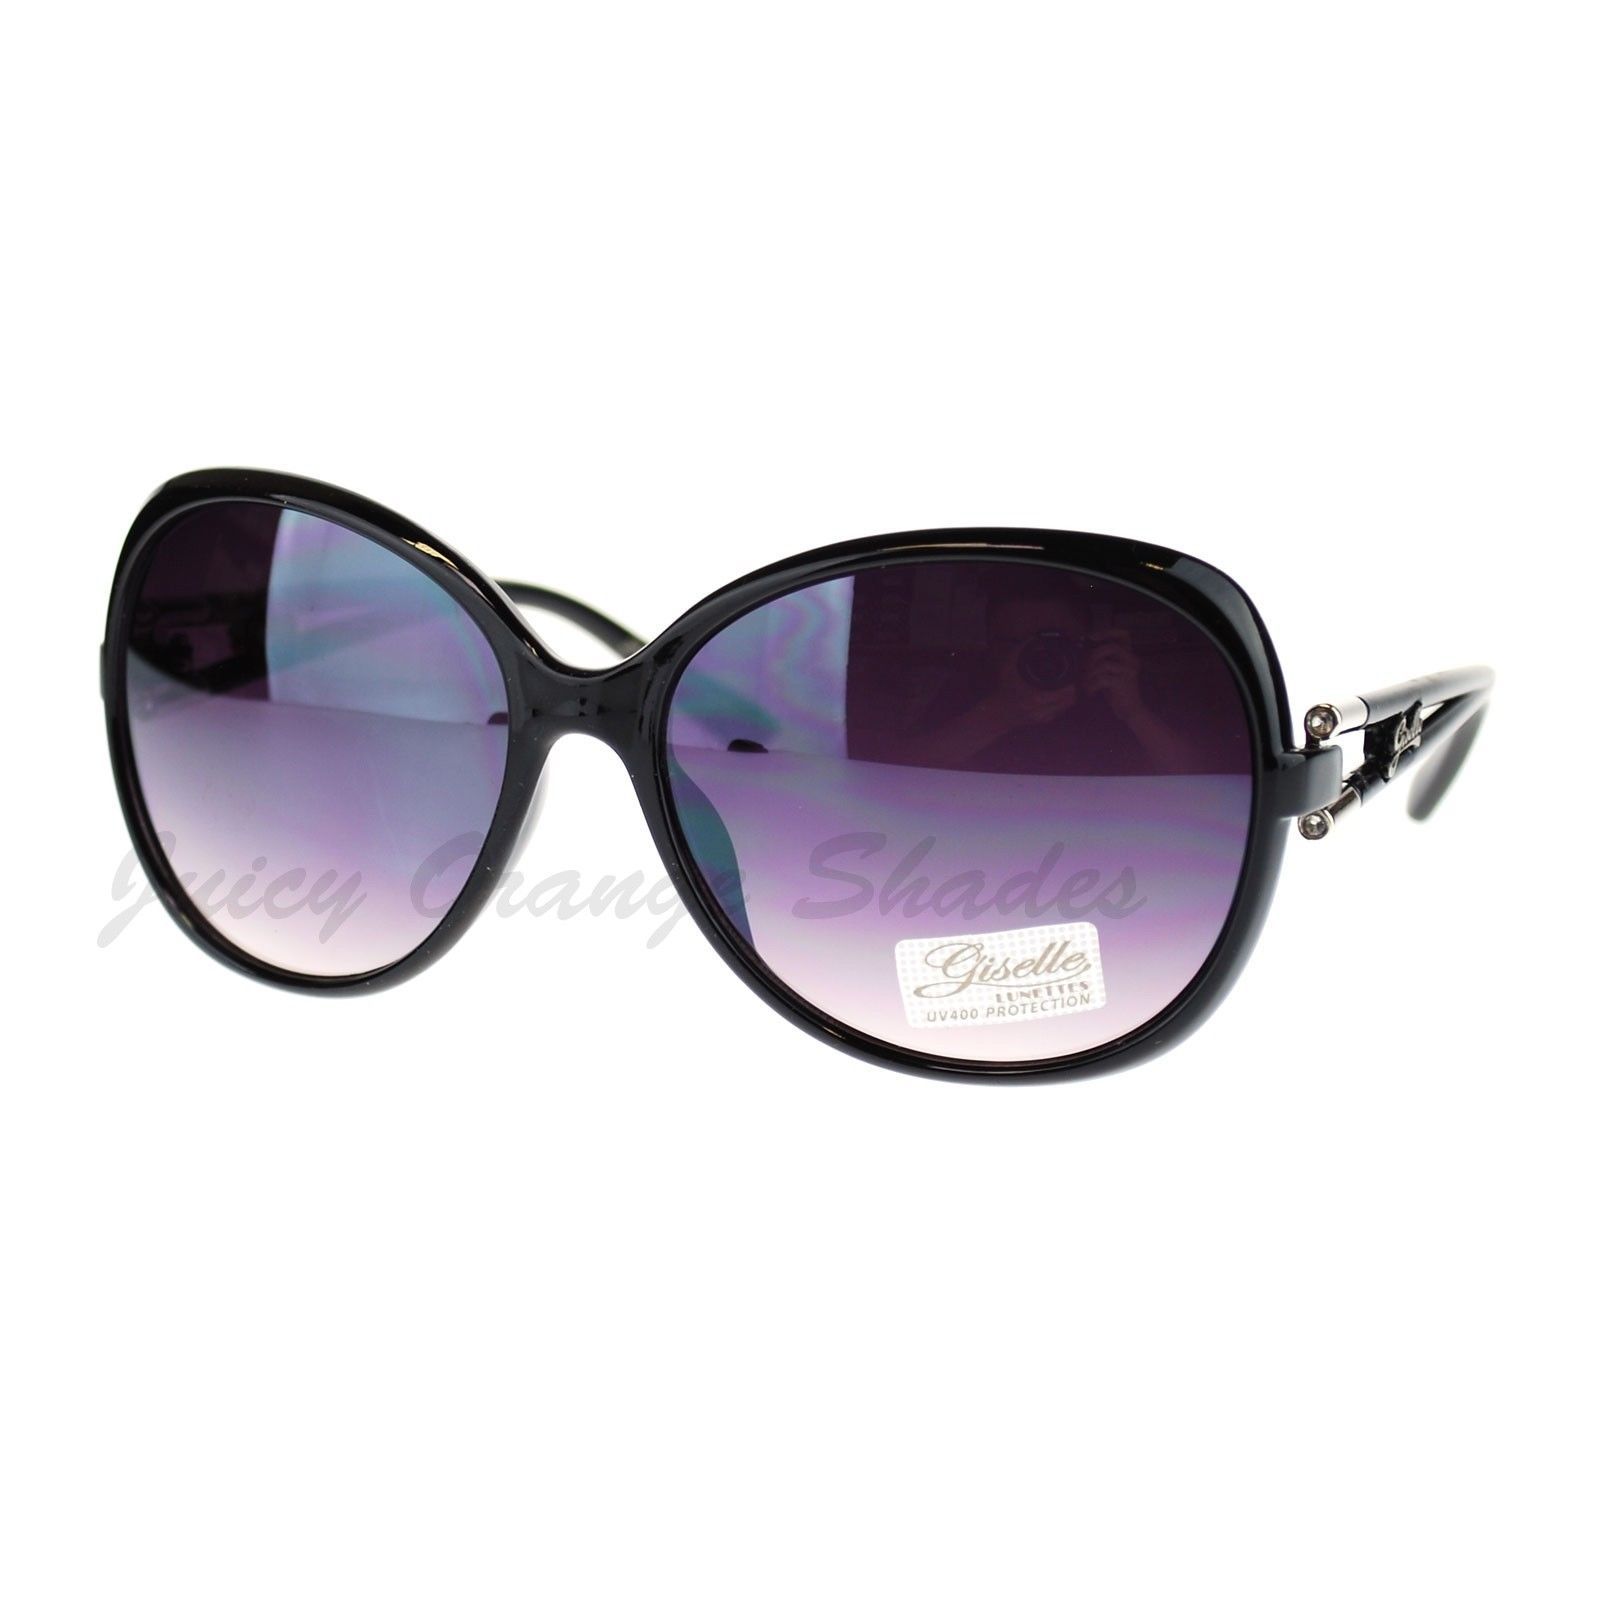 Womens Sunglasses Classic Oversize Round Butterfly Frame - $23.40